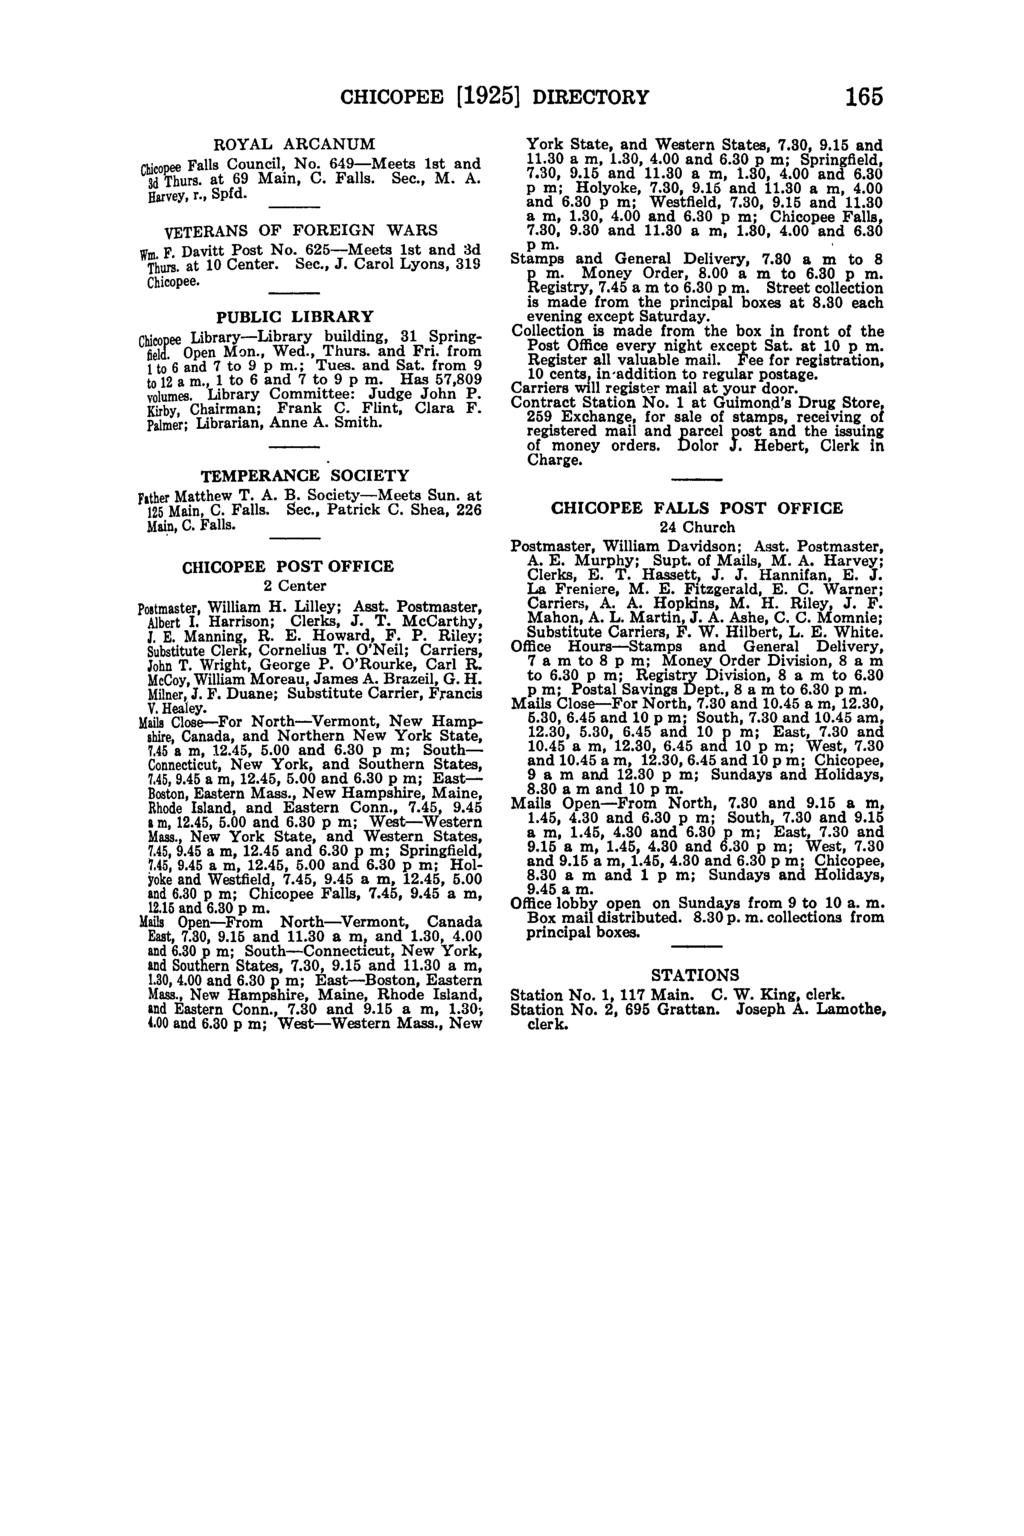 CHICOPEE [1925] DIRECTORY 165 ROYAL ARCANUM Chicopee Council, No. 649-Meets 1st and 3d Thurs. at 69 Main, C.. Sec., M. A. Harvey, r., Spfd. VETERANS OF FOREIGN WARS Wm. F. Davitt Post No.